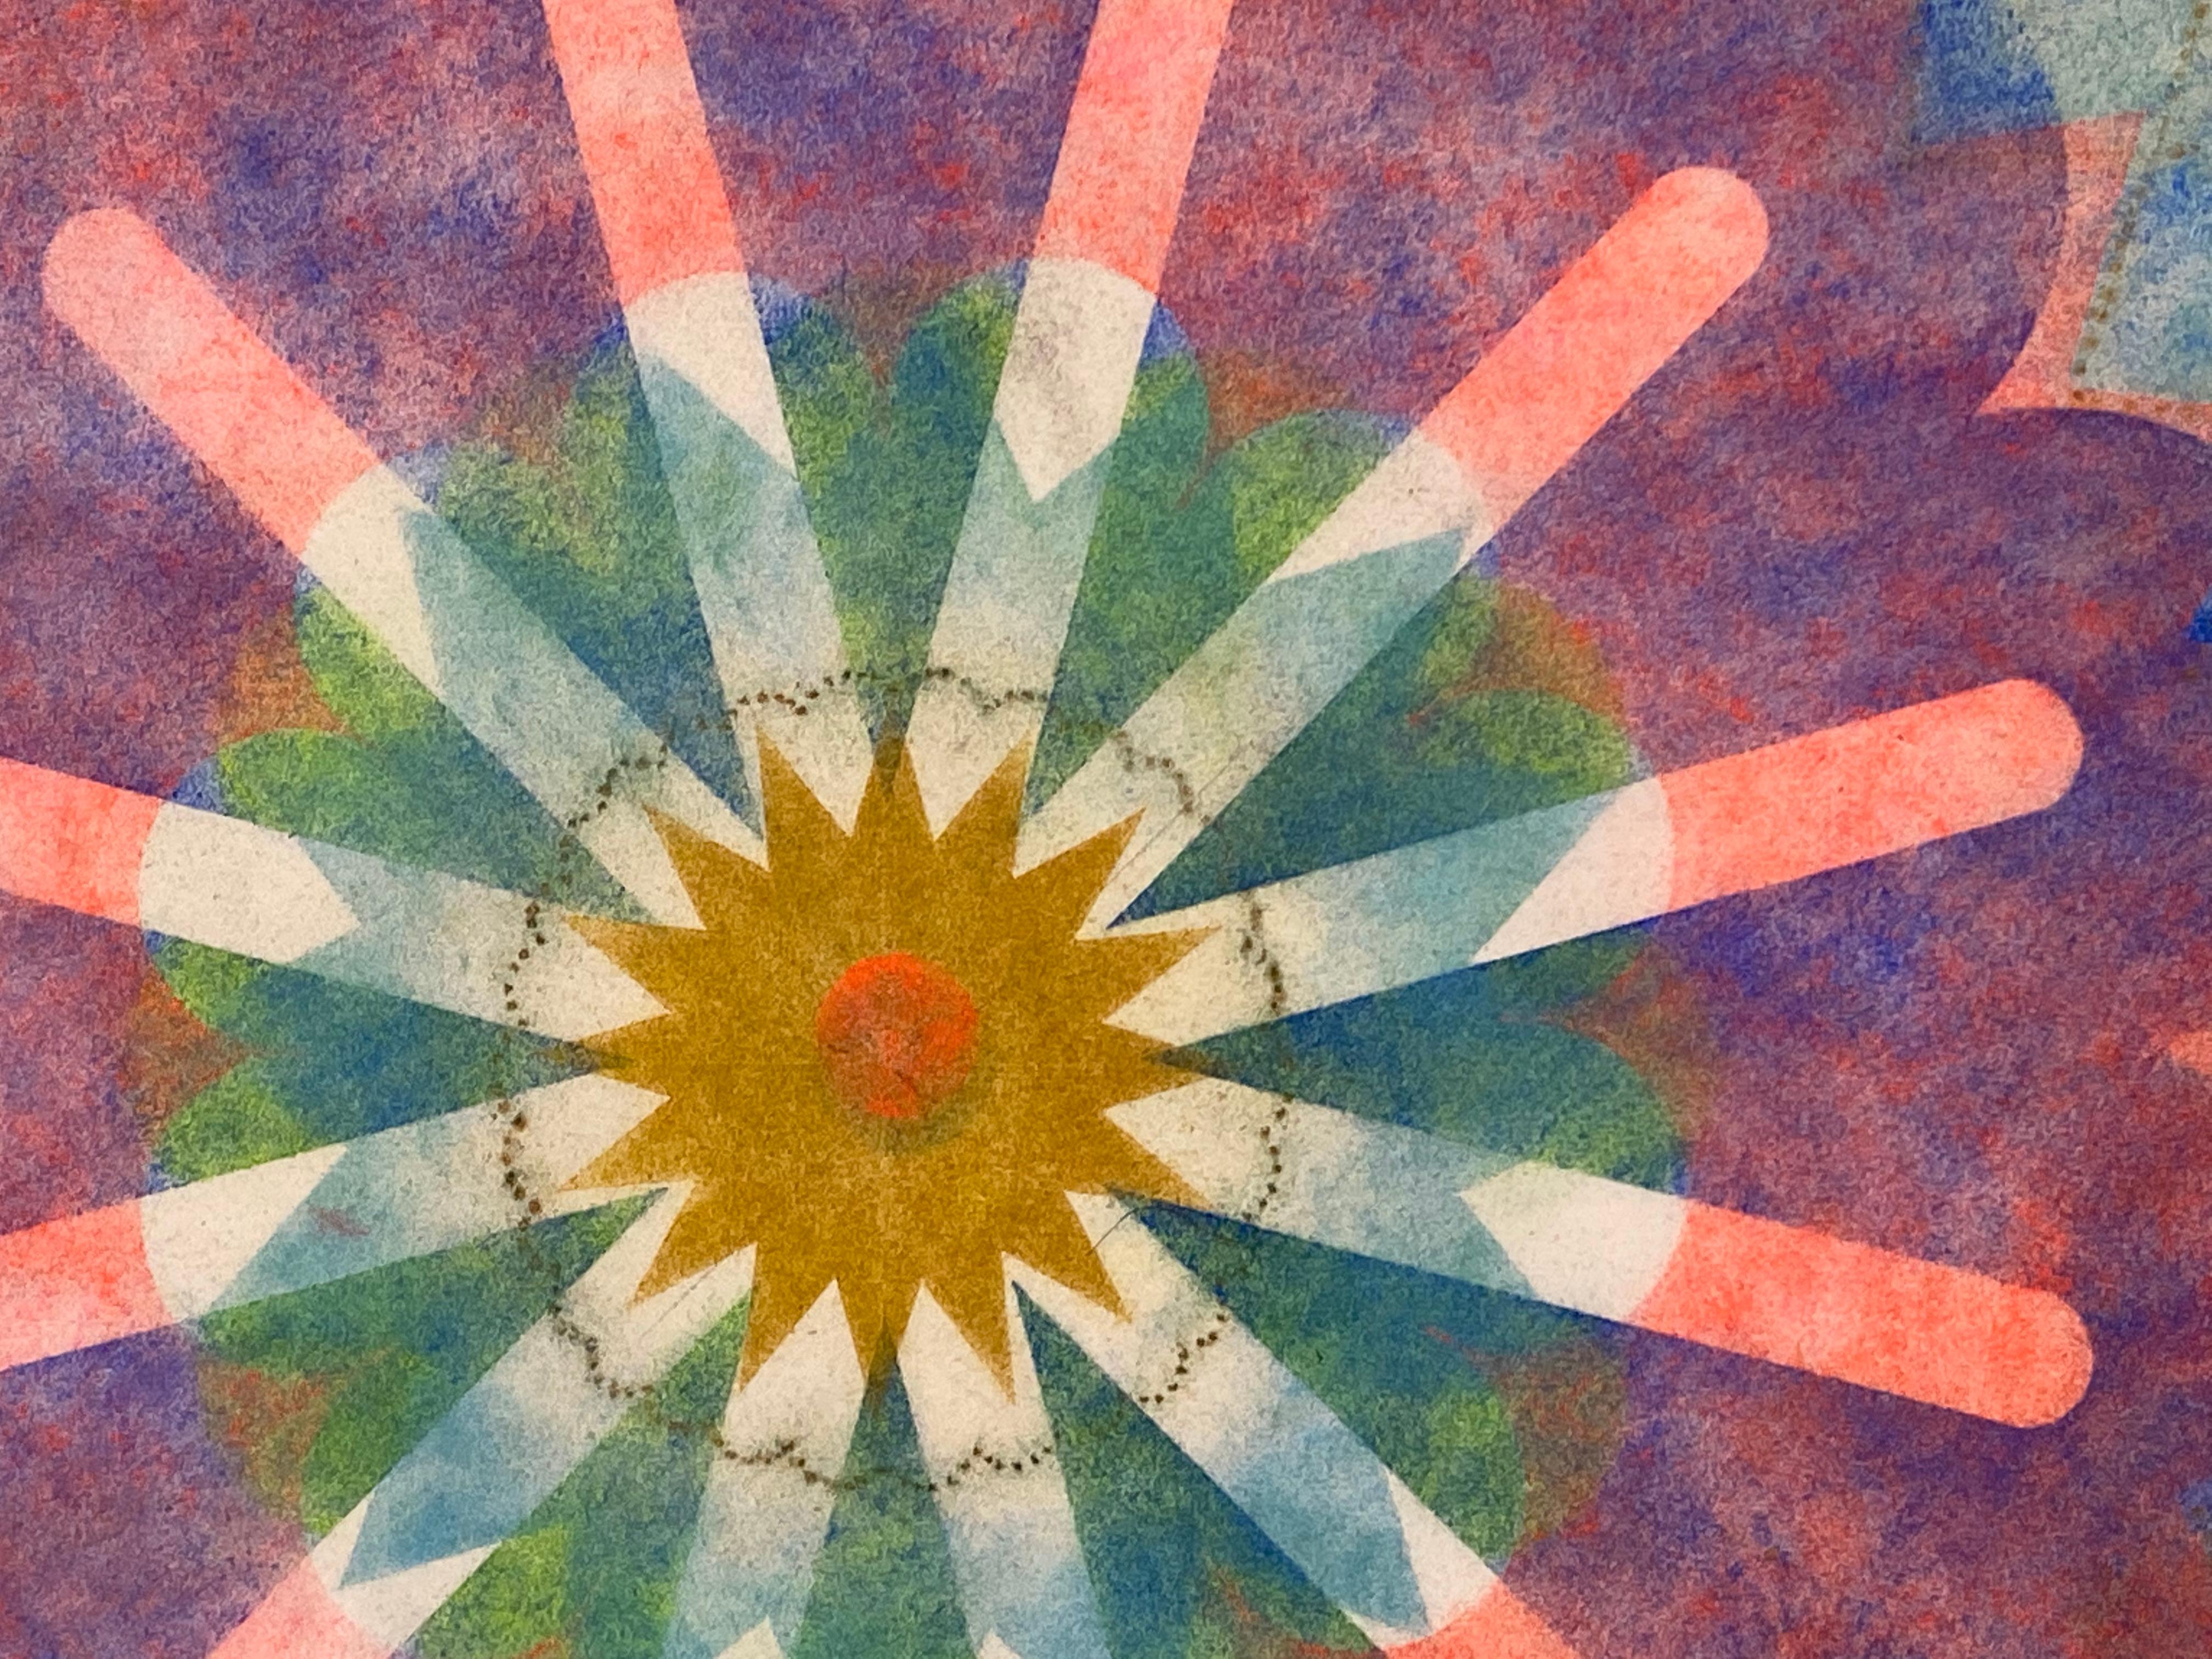 This multicolored drawing has a beautiful, soft mottled texture created with Judge's unique powered pigment technique. Primavera Pop 03 is a predominately light blue geometric flower mandala shape with bright pink, yellow and orange at the center